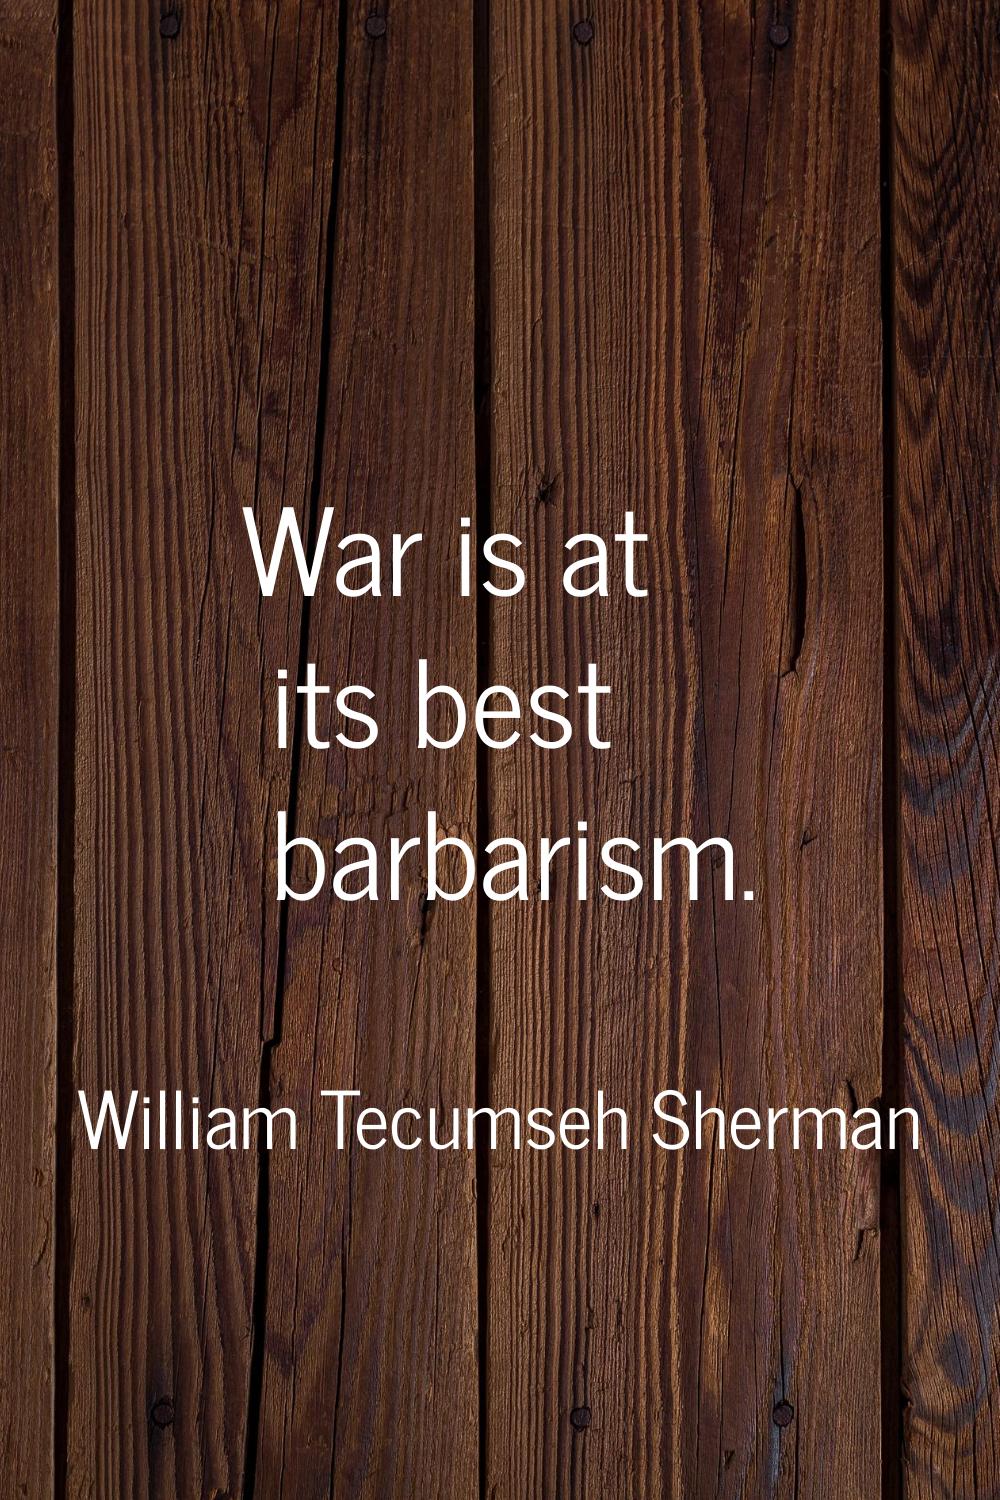 War is at its best barbarism.